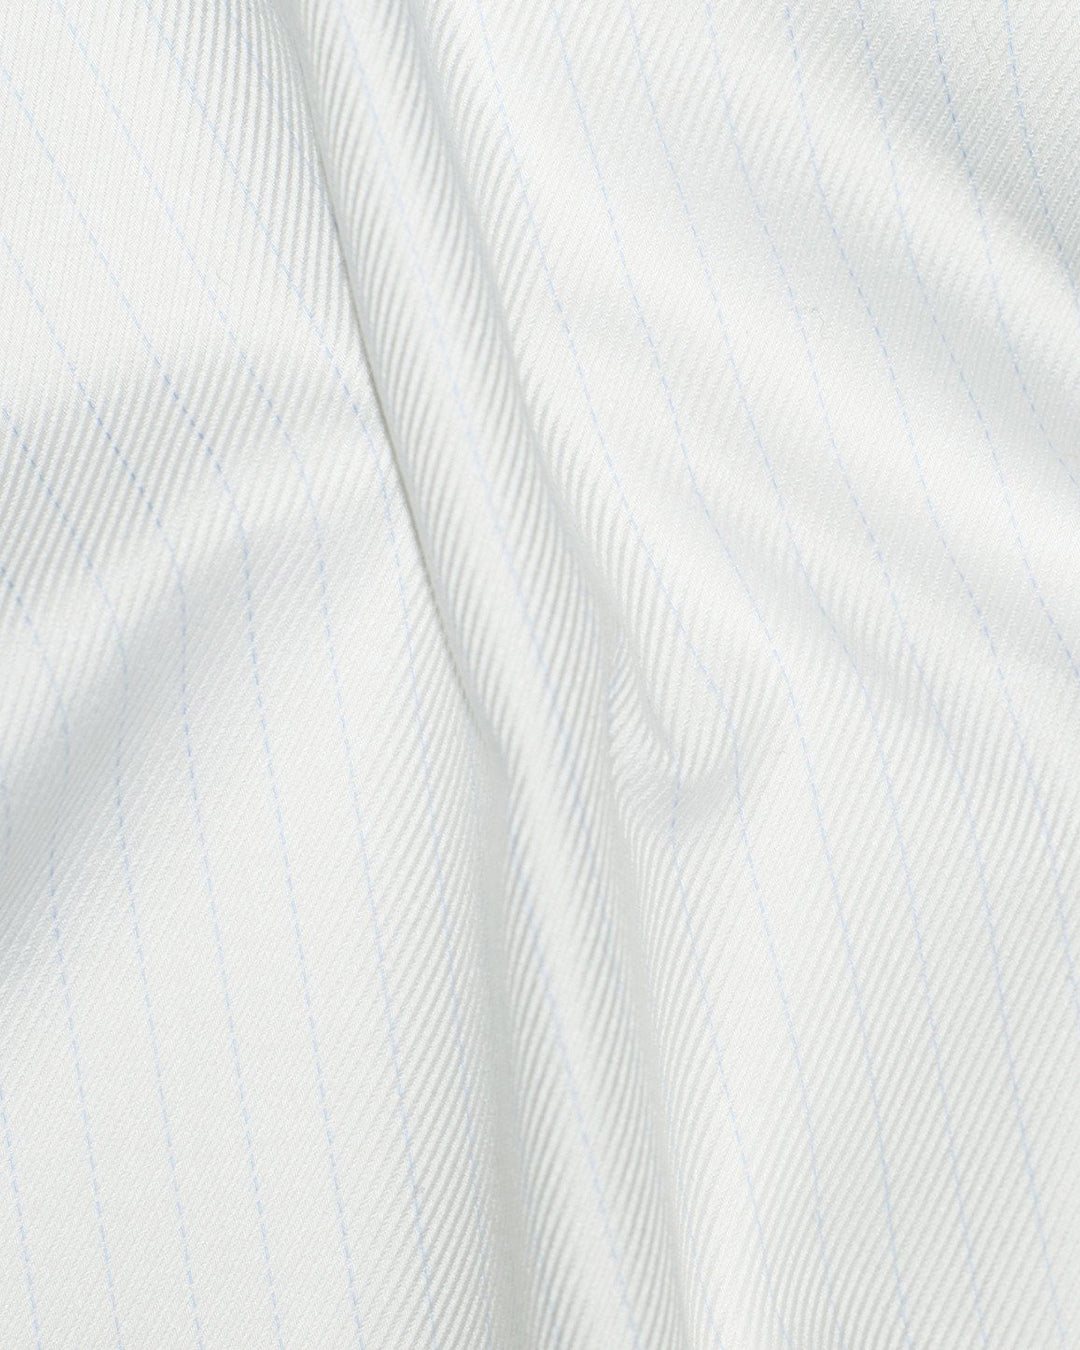 Zegna White Twill With Pale Blue HairLine Stripes